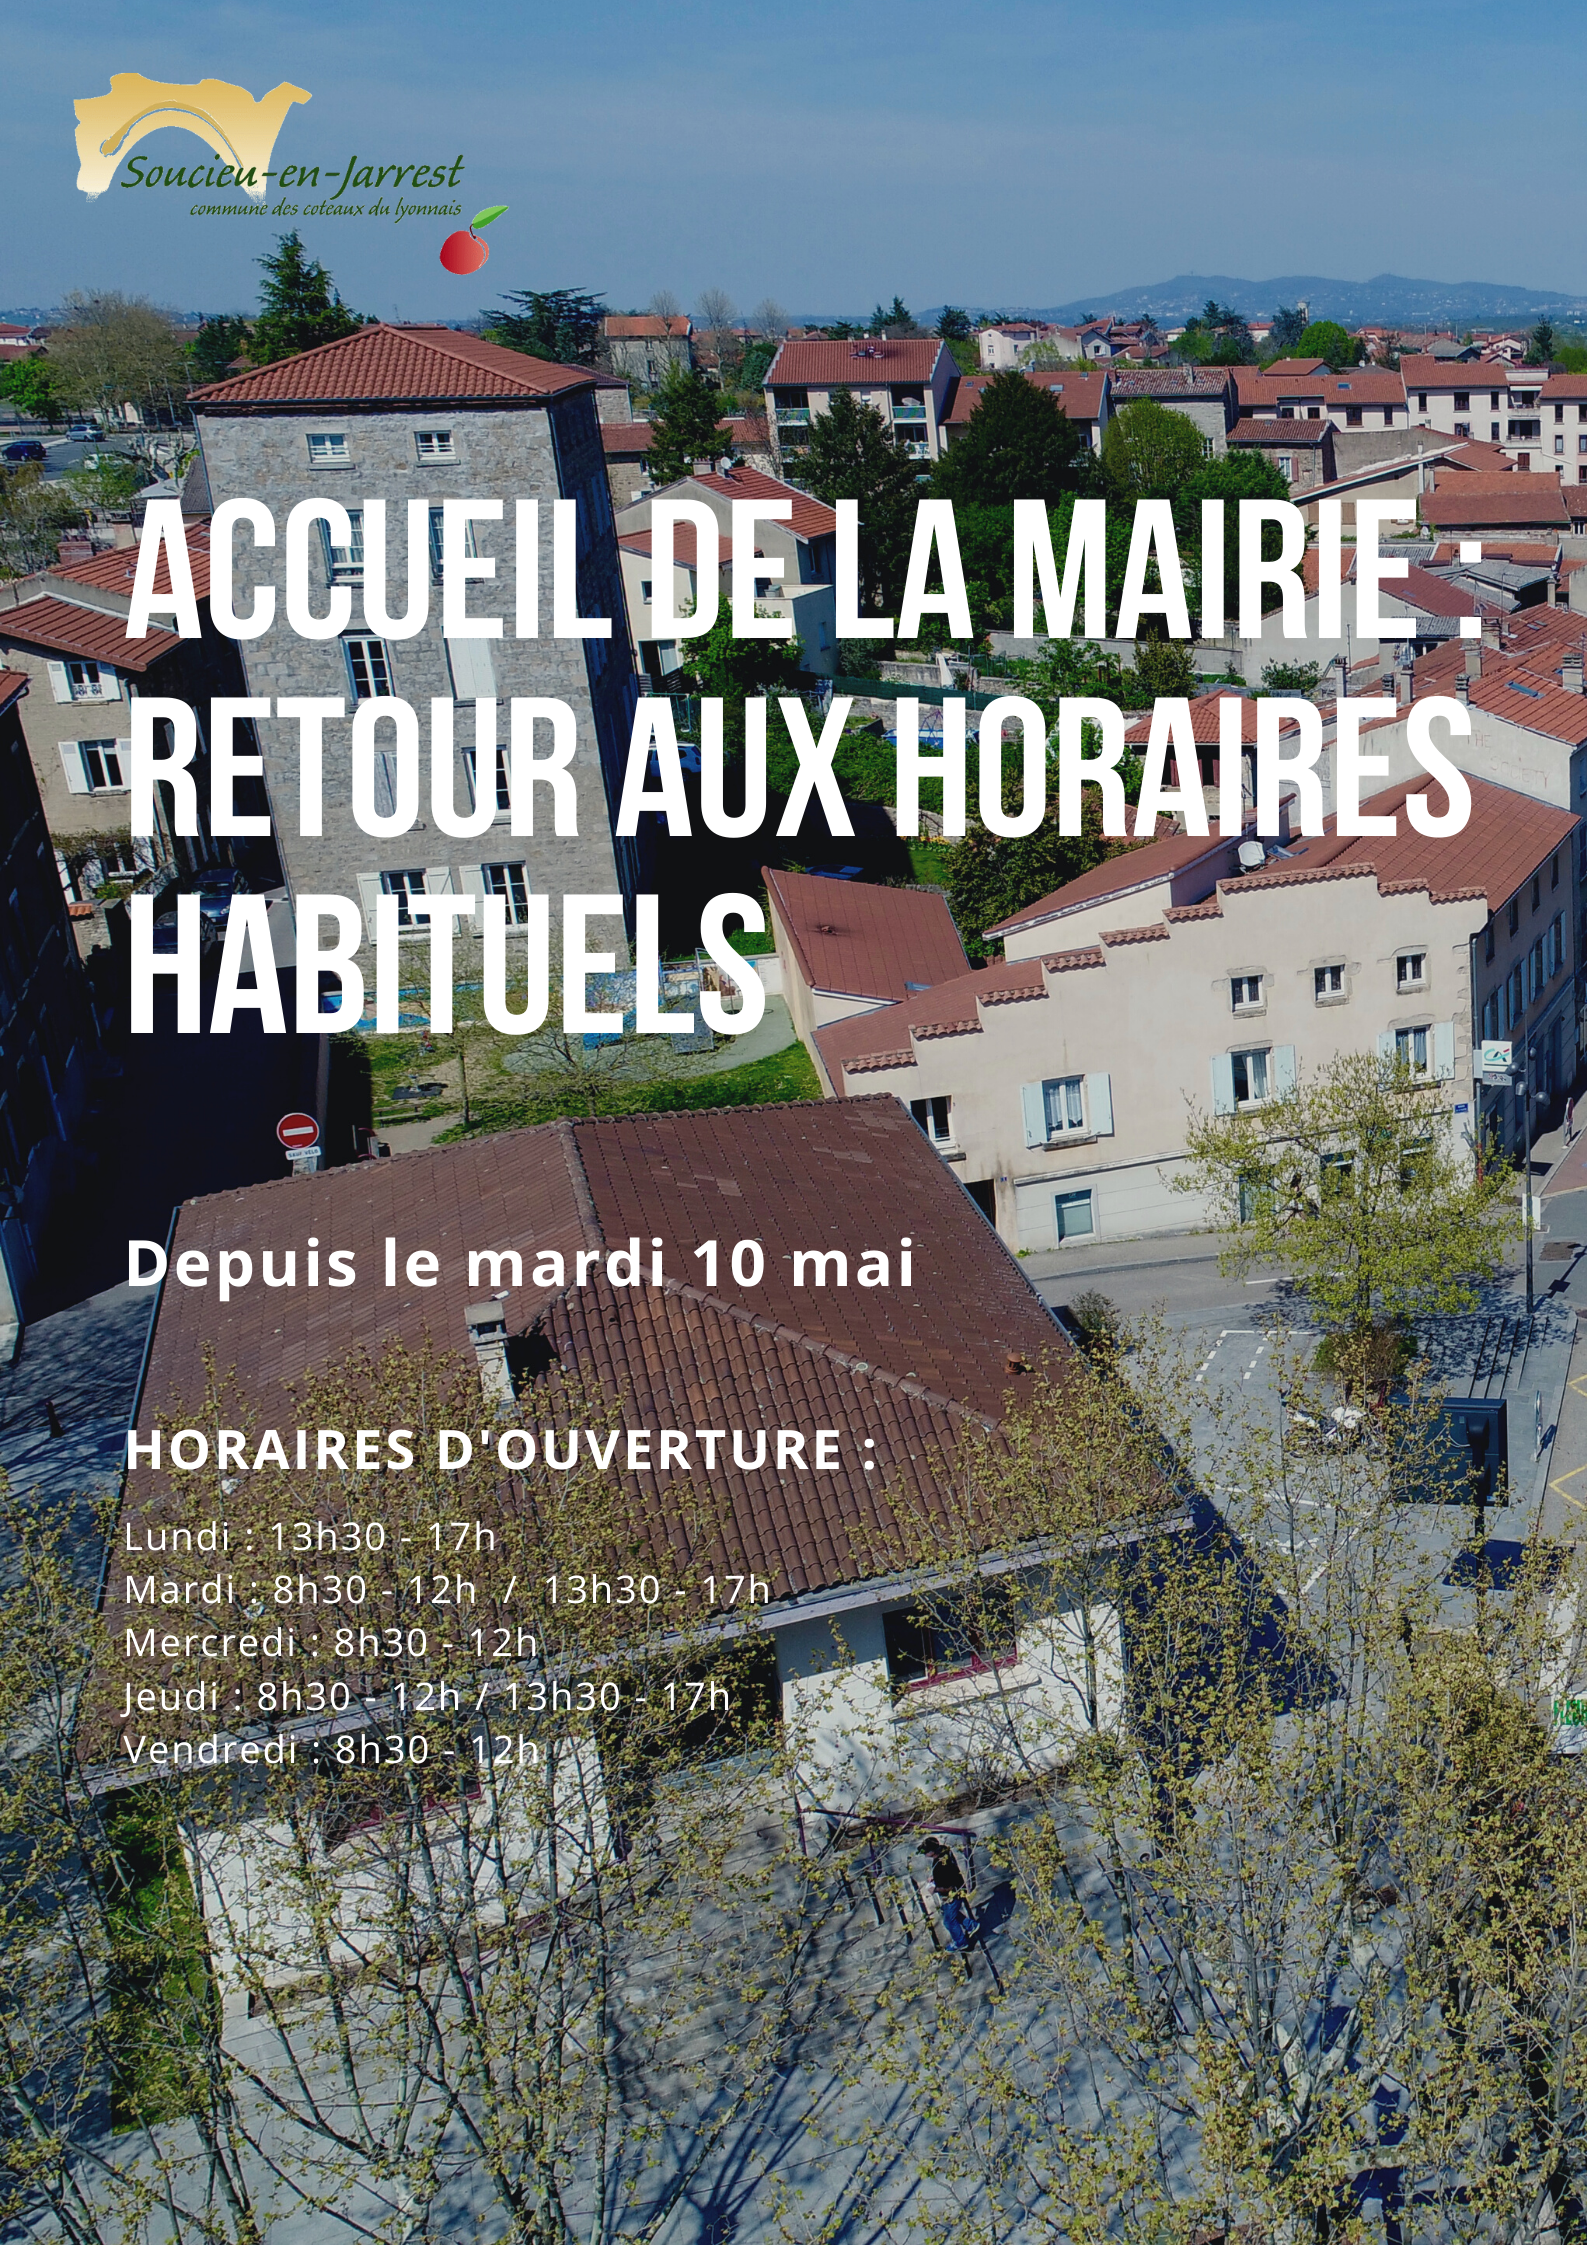 Horaires mairie